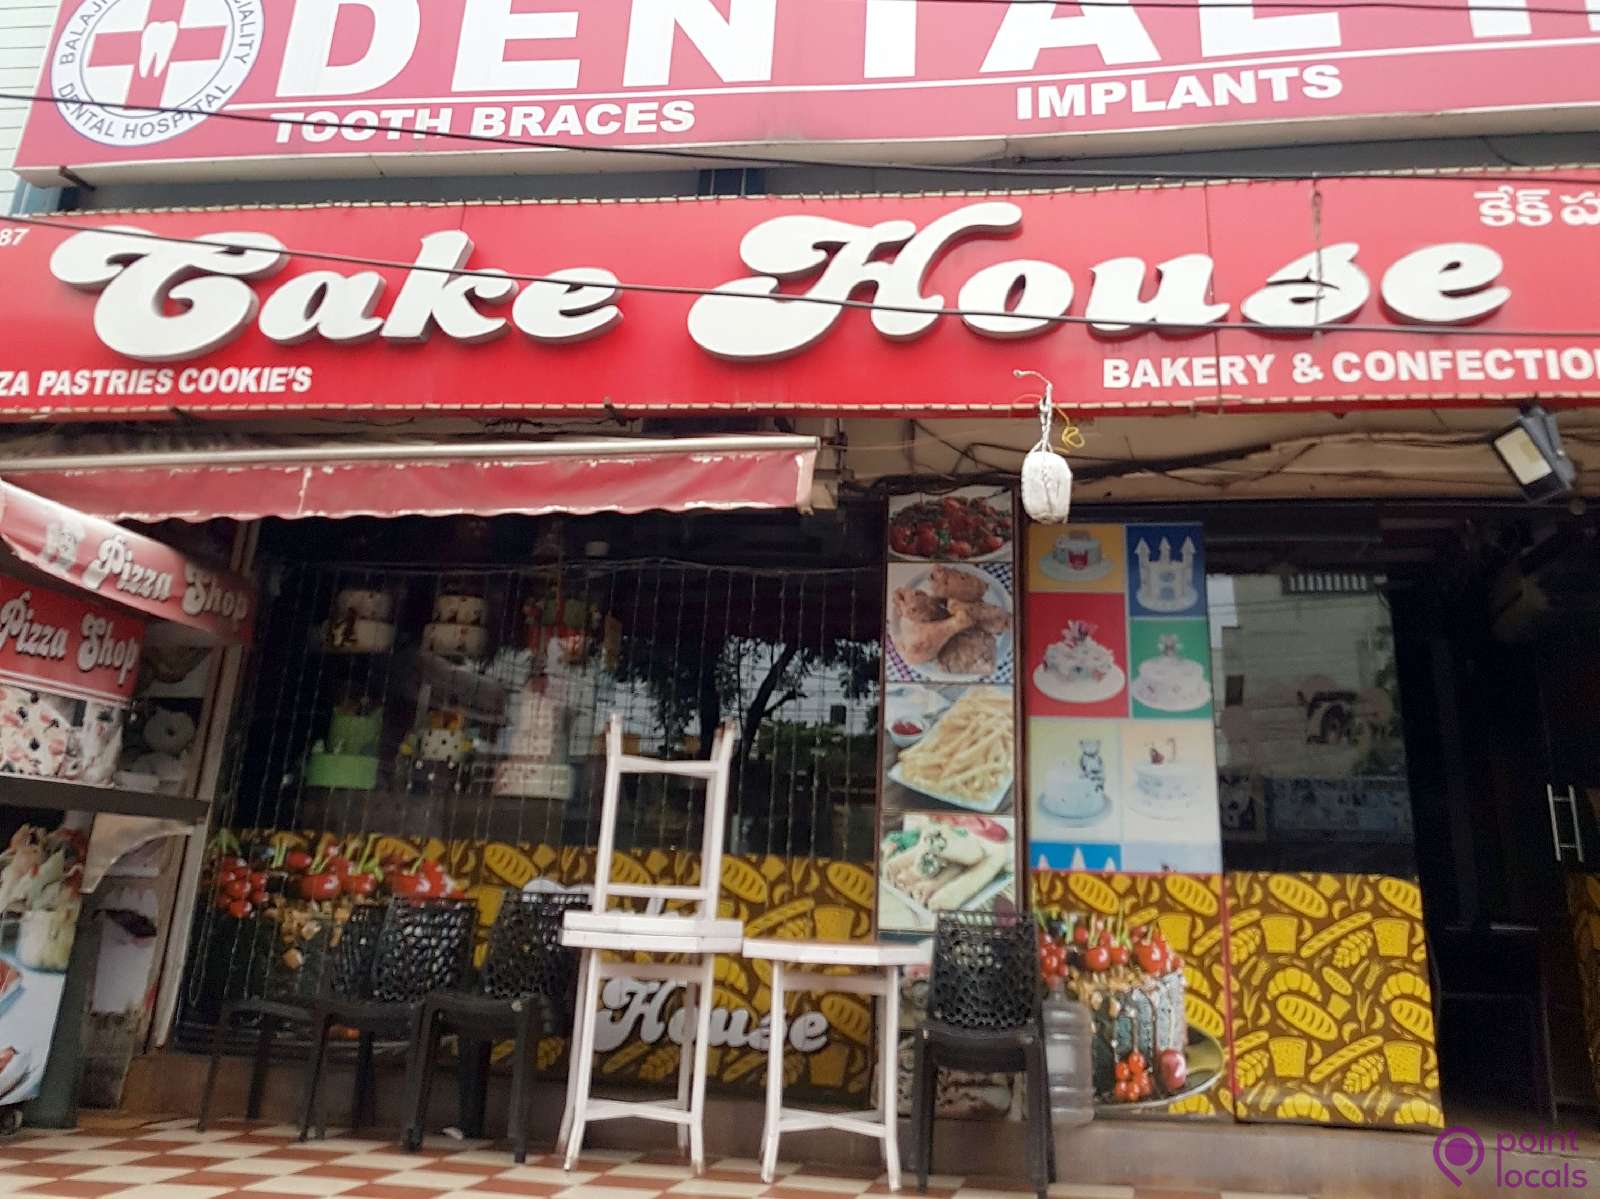 Local Guides Connect - Where to find best cool cakes in Hyderabad? - Local  Guides Connect